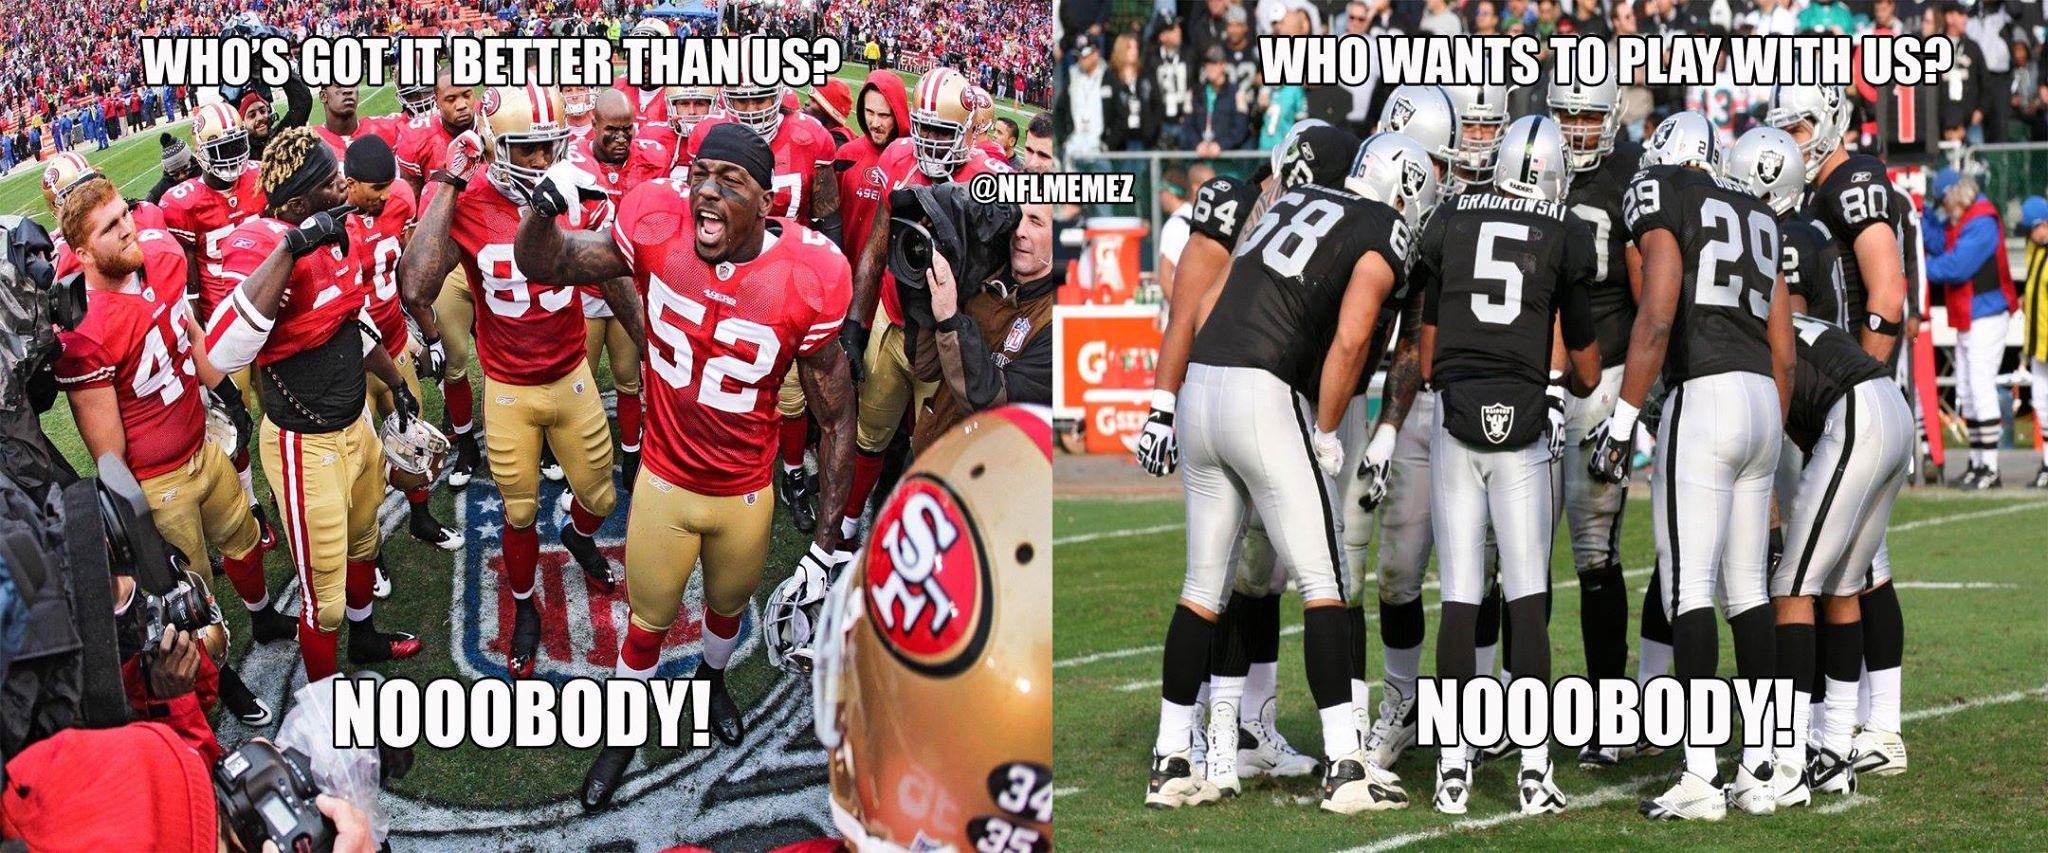 NFL Memes on Twitter: "Battle of the Bay Be Like...#Niners ...